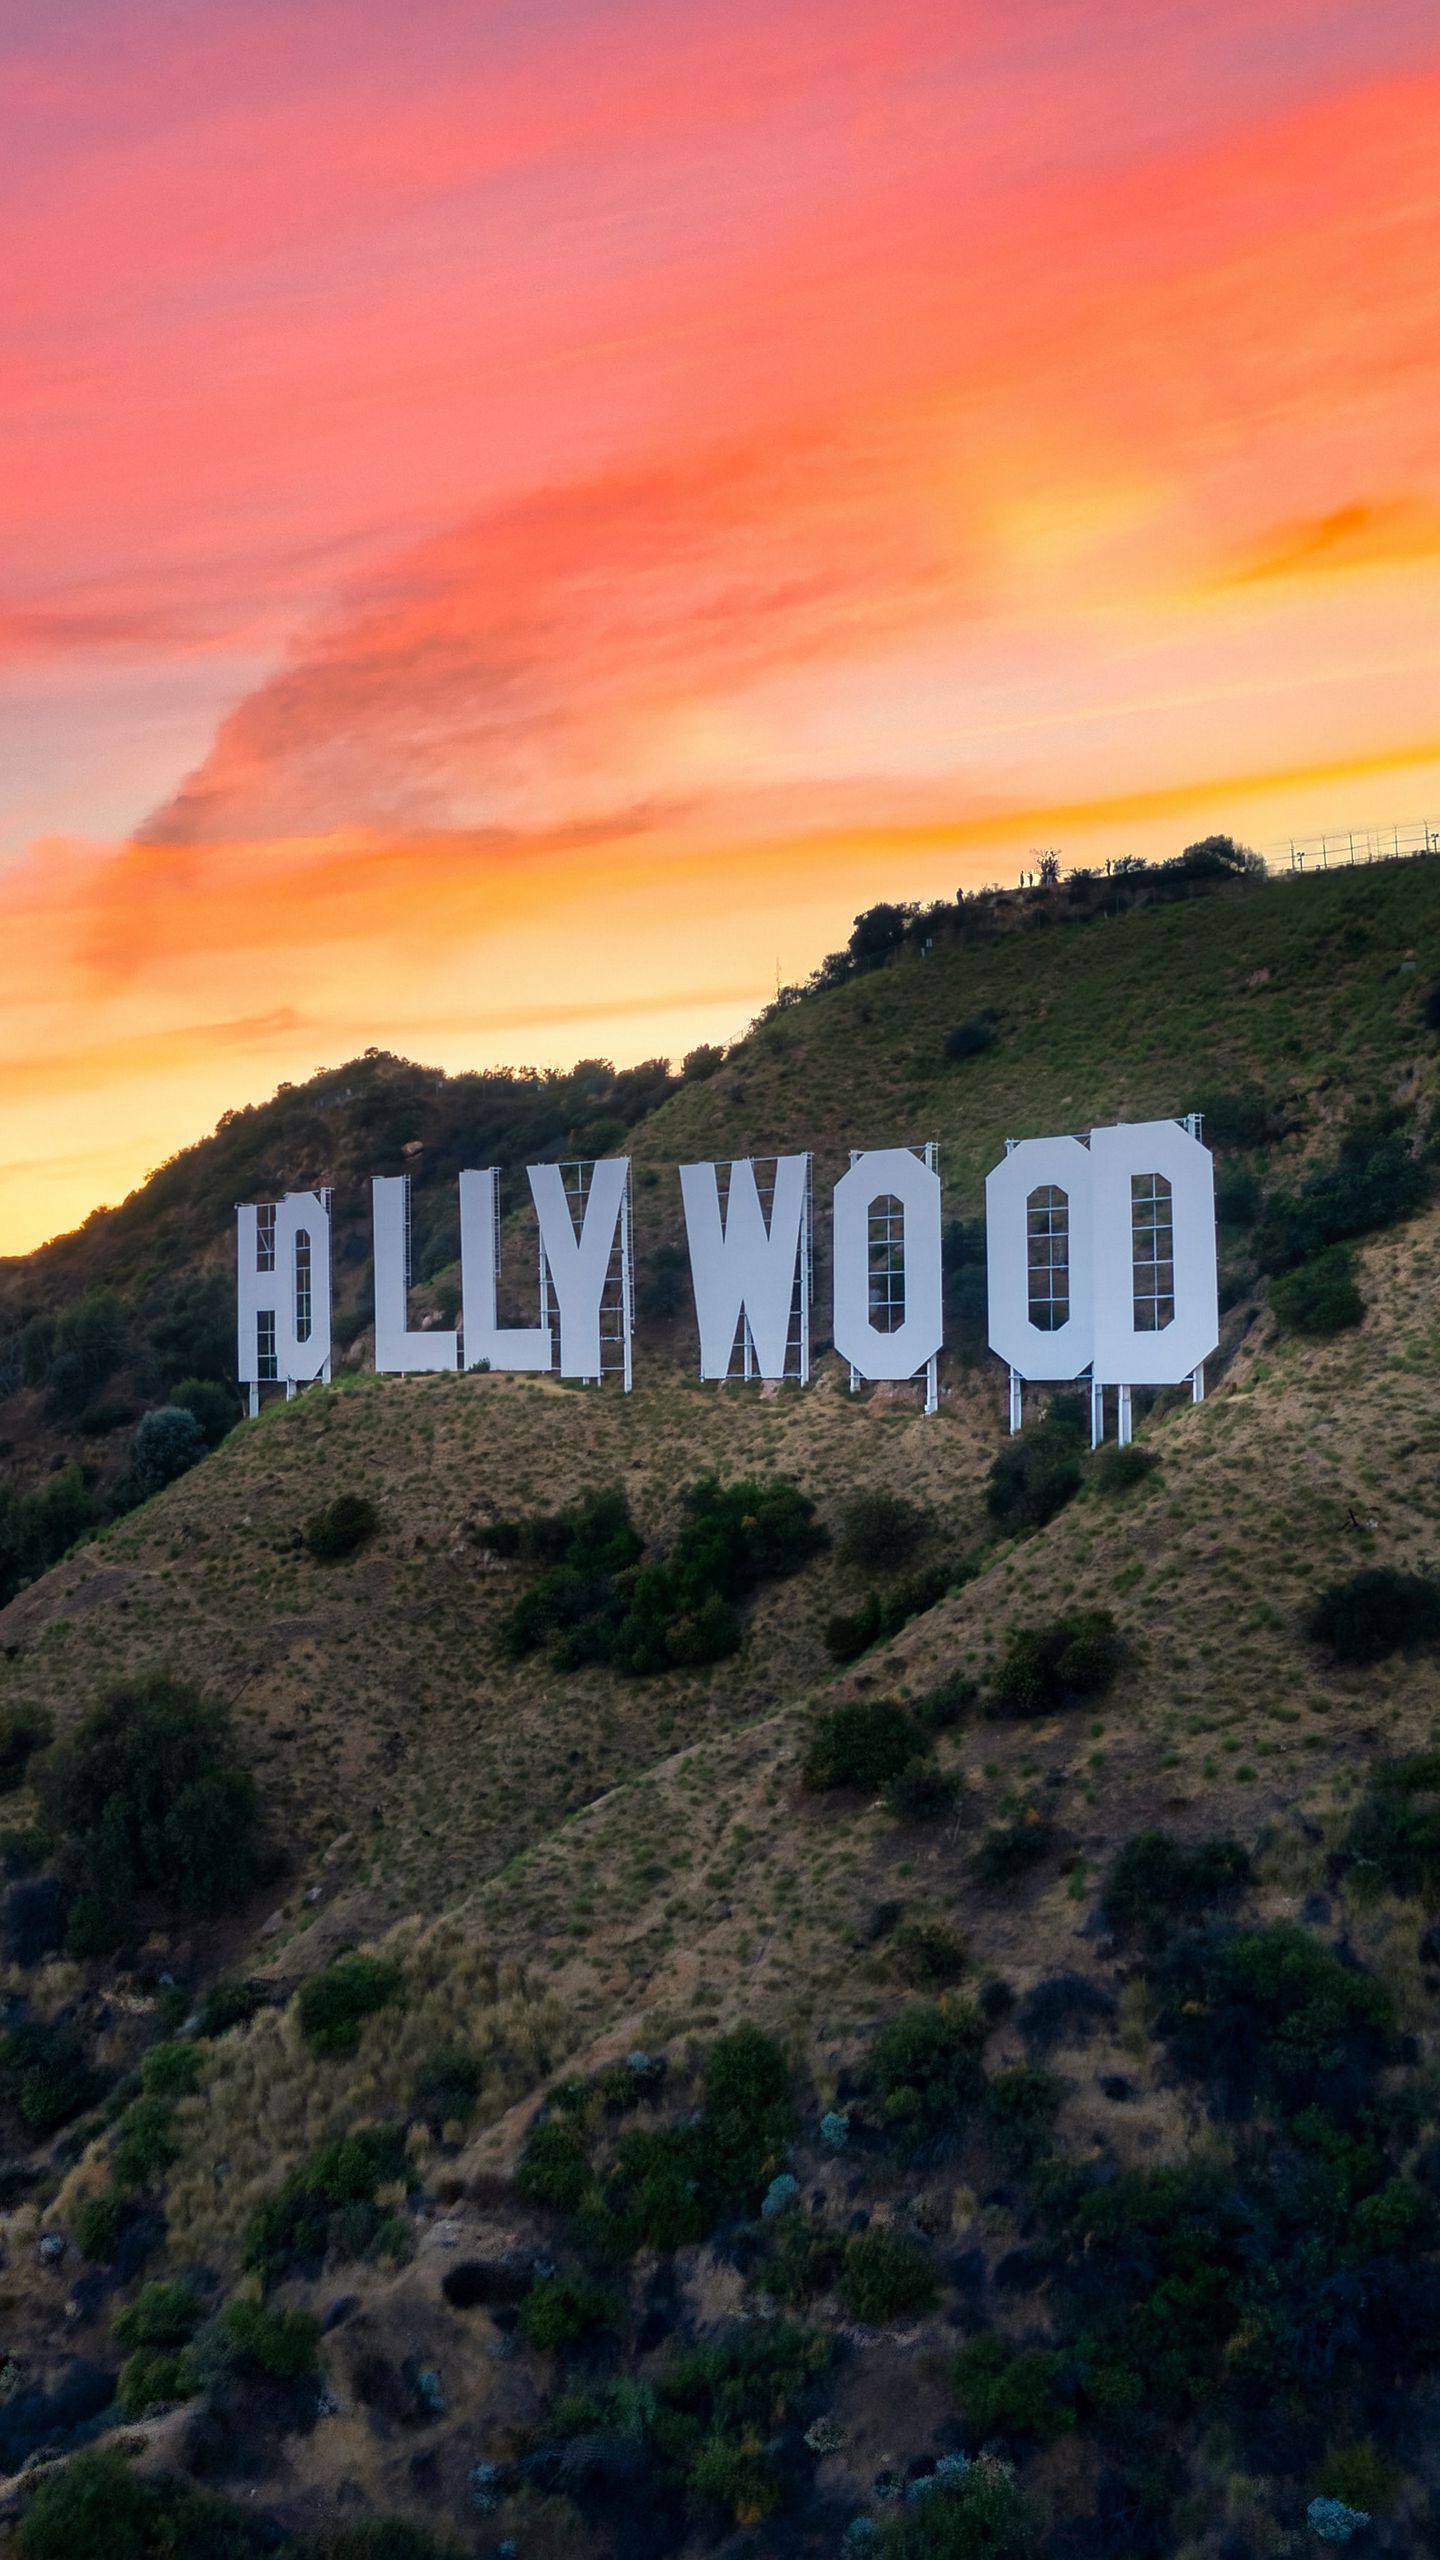 Wallpaper ID 212230  bright white sunset next to the hollywood sign  white sunset next to hollywood sign 4k wallpaper free download